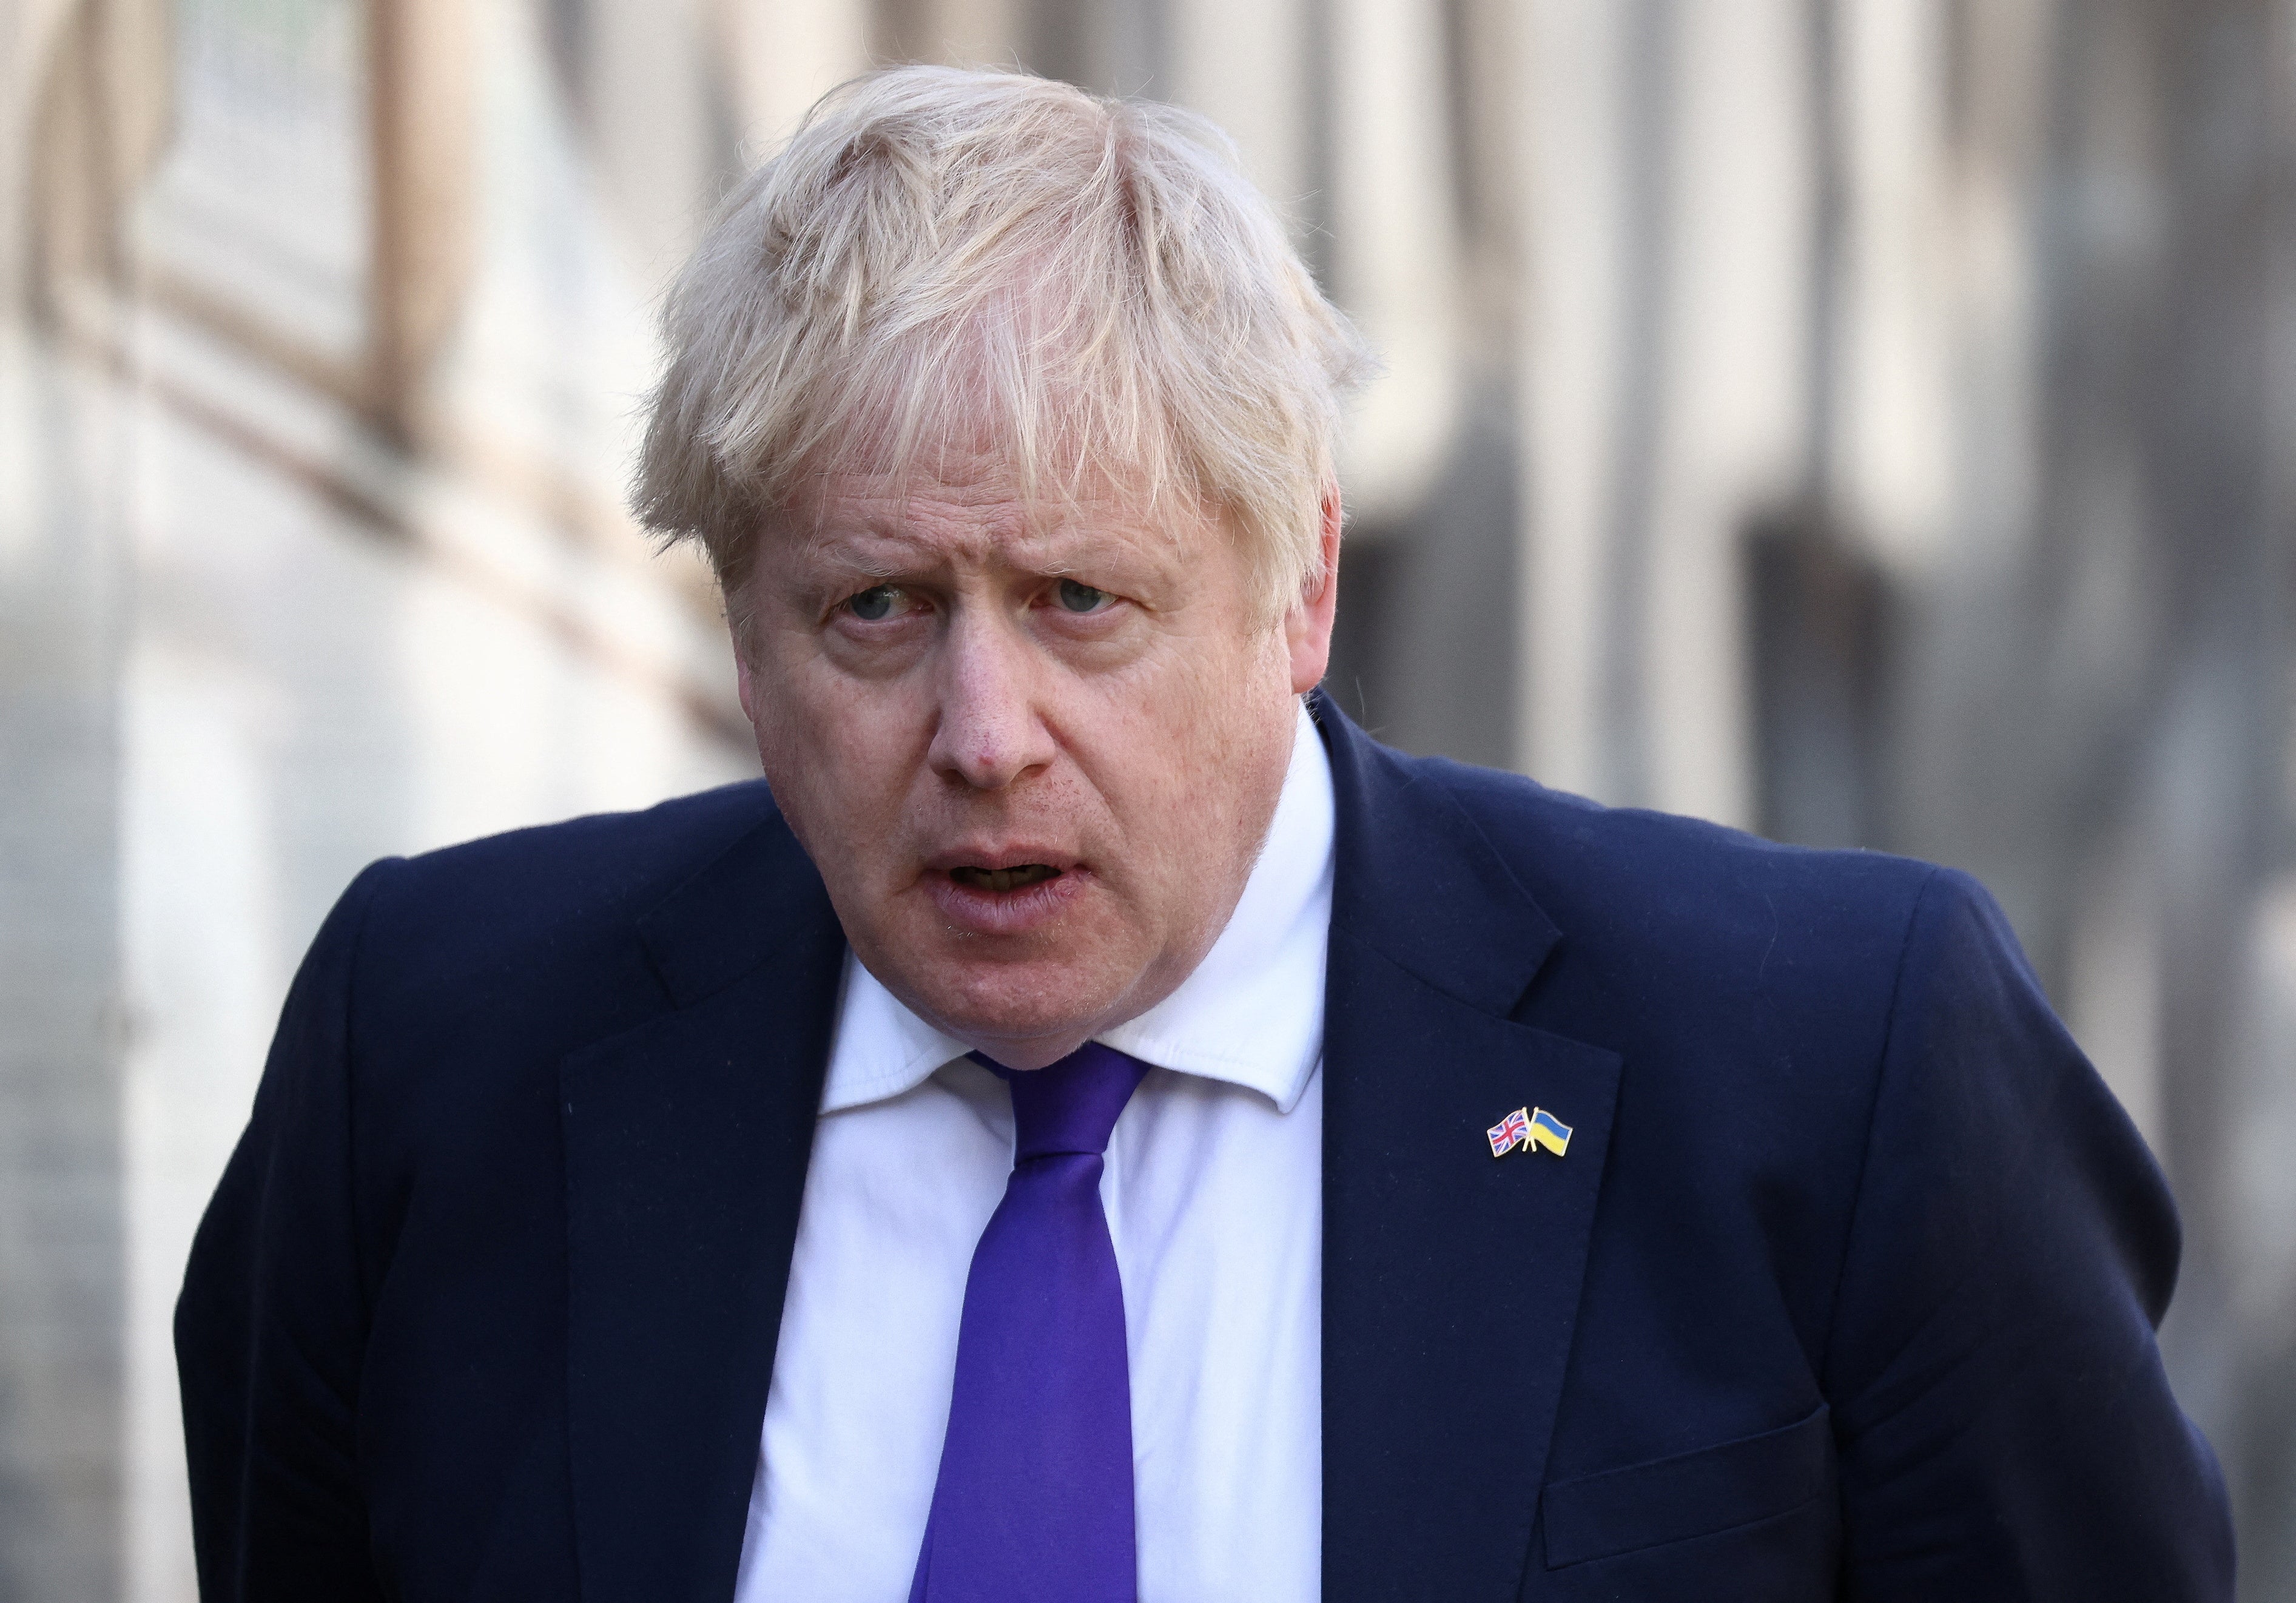 Boris Johnson will not take part in the second meeting at the gathering of world leaders